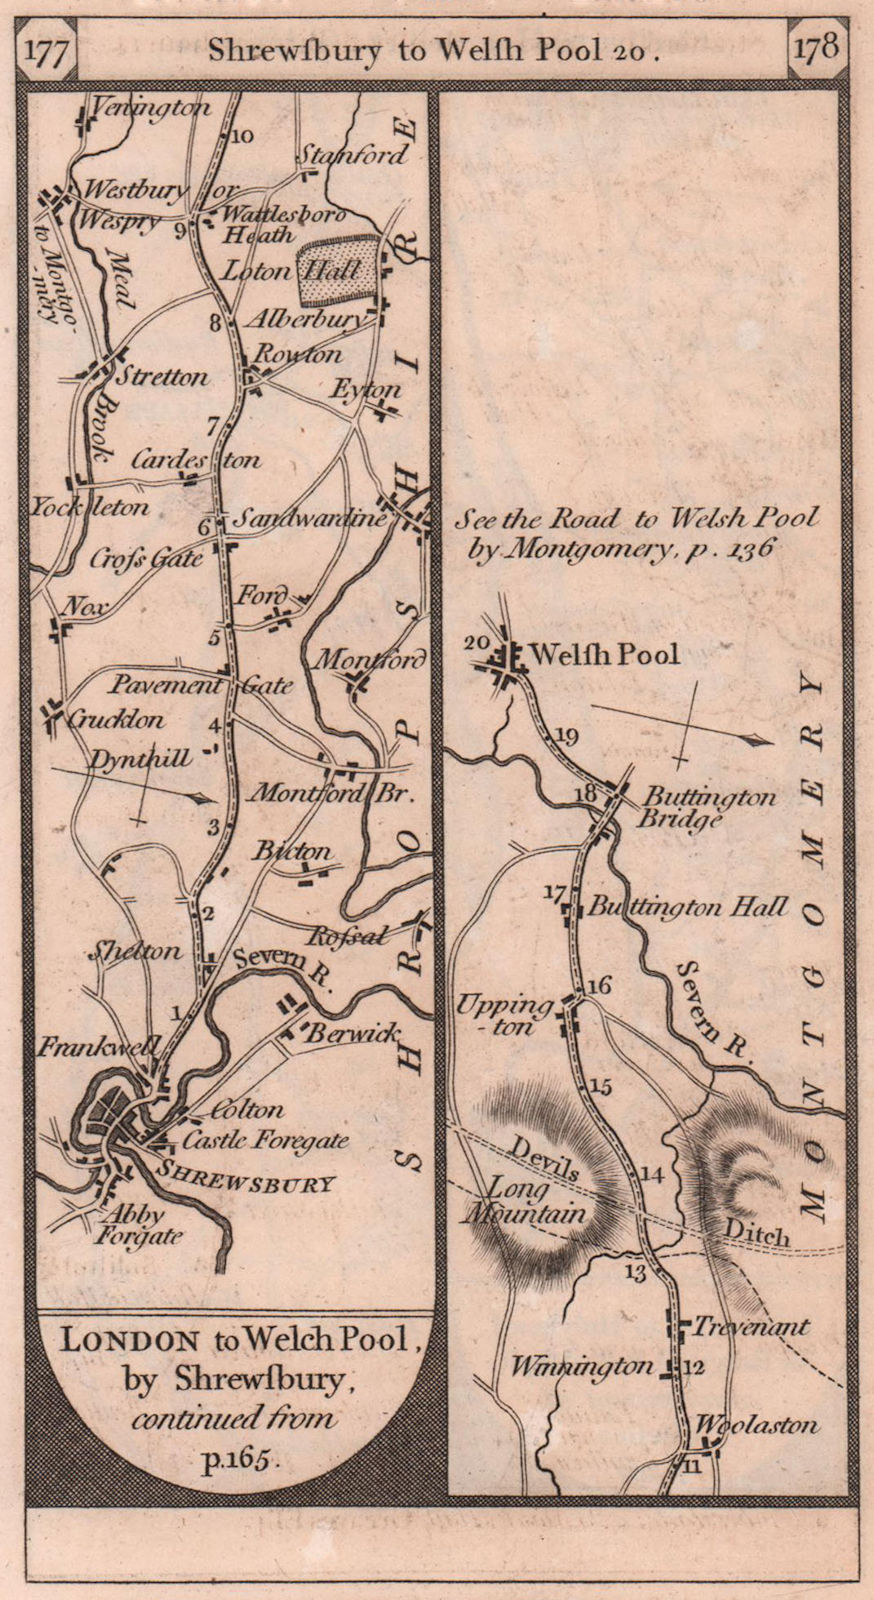 Associate Product Shrewsbury - Westbury - Weslhpool road strip map PATERSON 1803 old antique